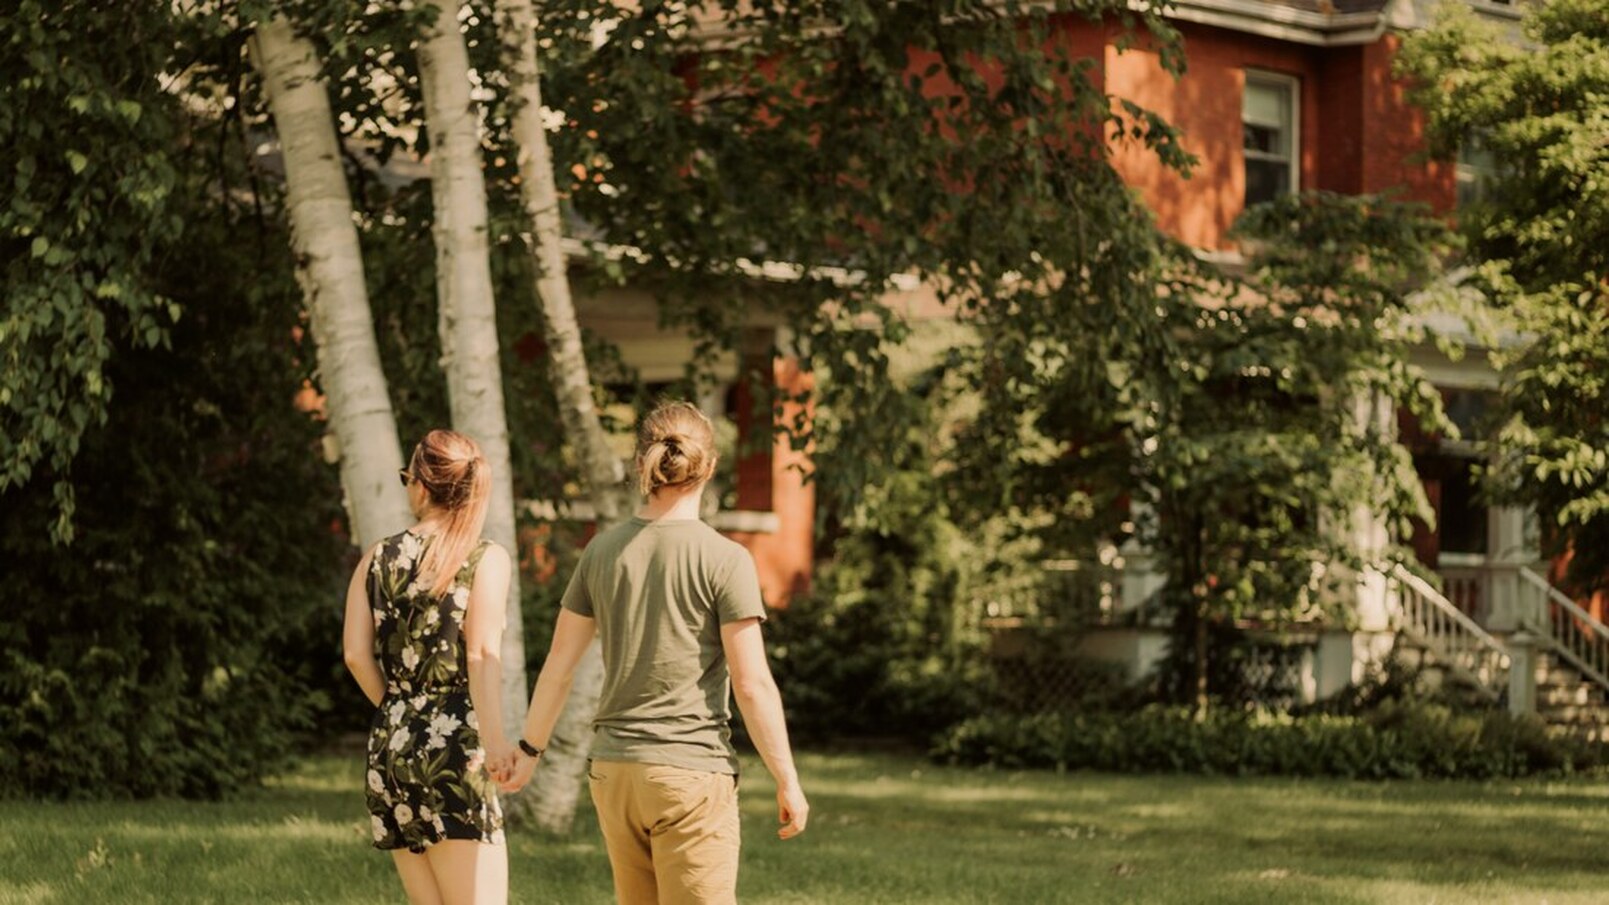 Here is a couple walking in the courthouse district! On the left is a female wearing a floral romper with a black background. She is holding the hand of a man wearing a green shirt and khaki bottoms. All around them is green grass and some trees. Beside them is a red brick house out of focus.